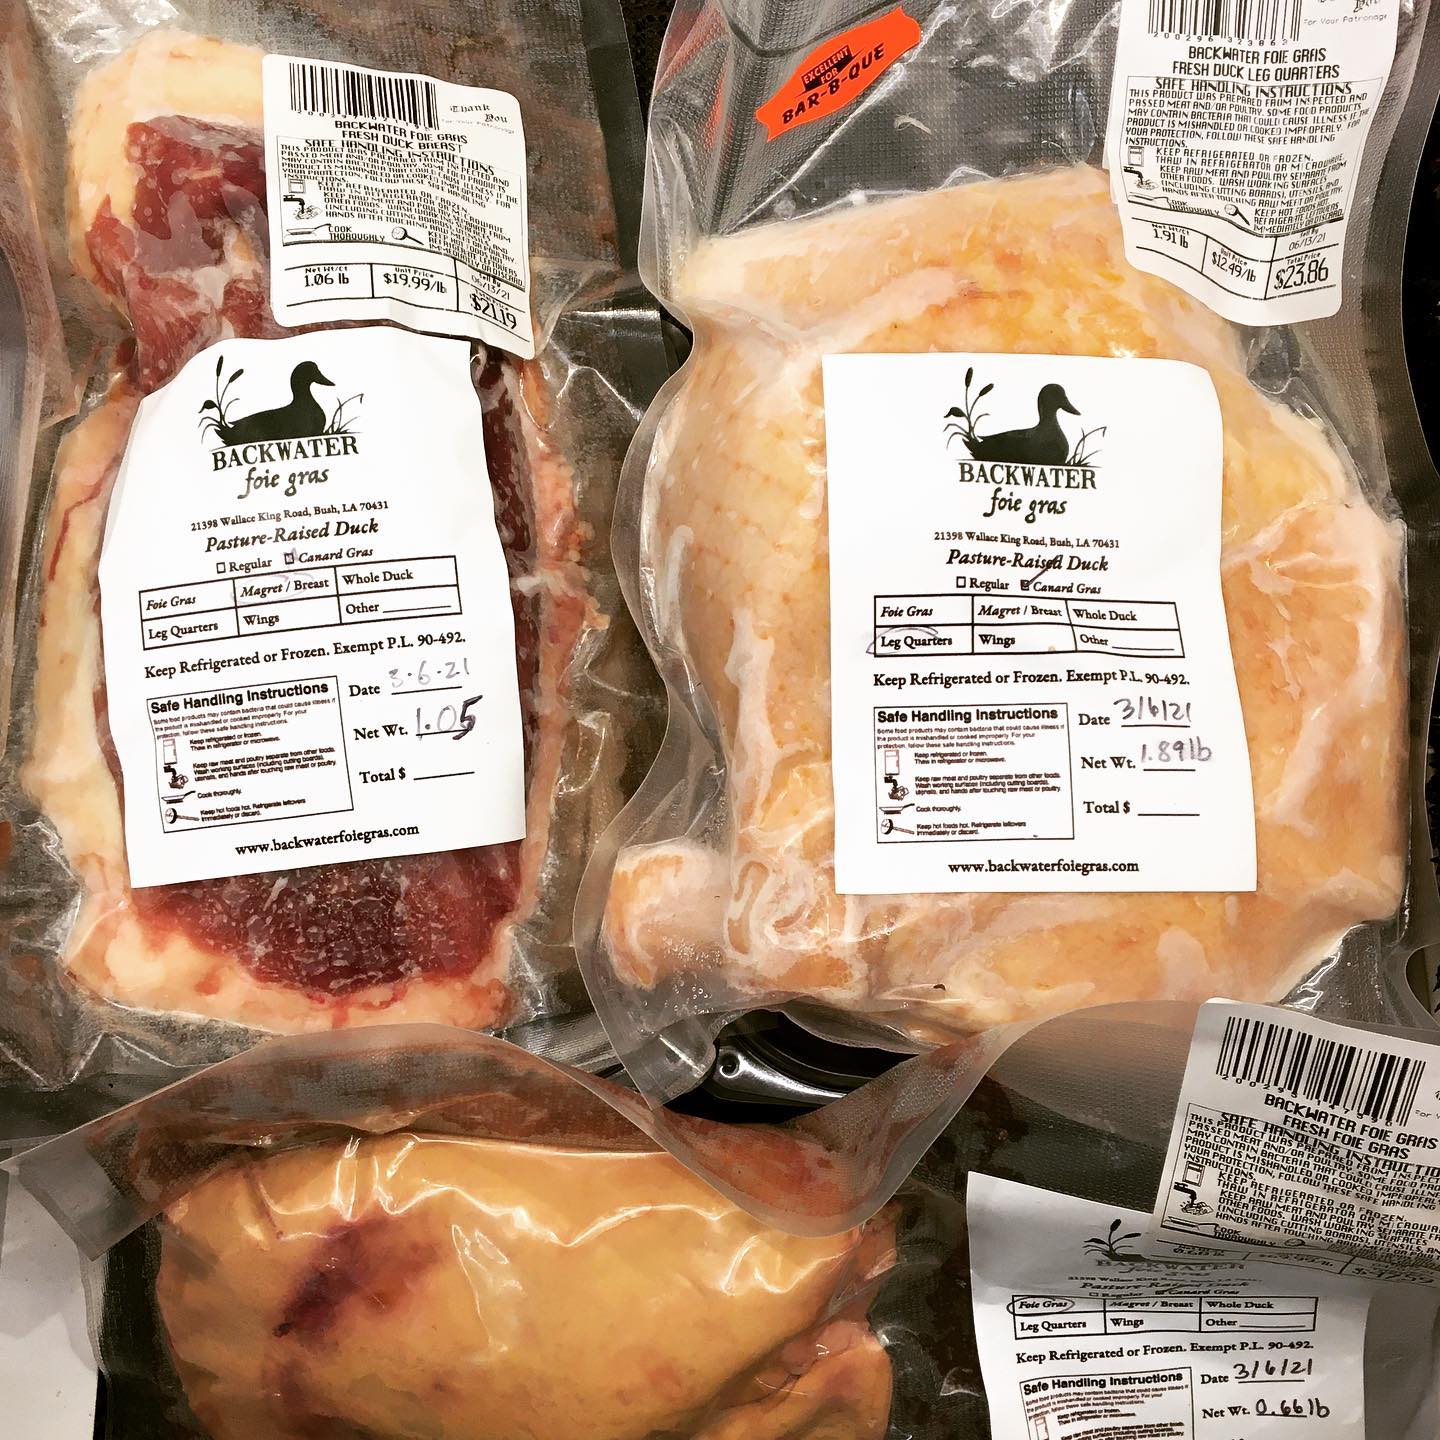 Ducks have migrated to Calandro’s Mid-City from @backwaterfoiegras! We have fresh Foie Gras, Breasts and